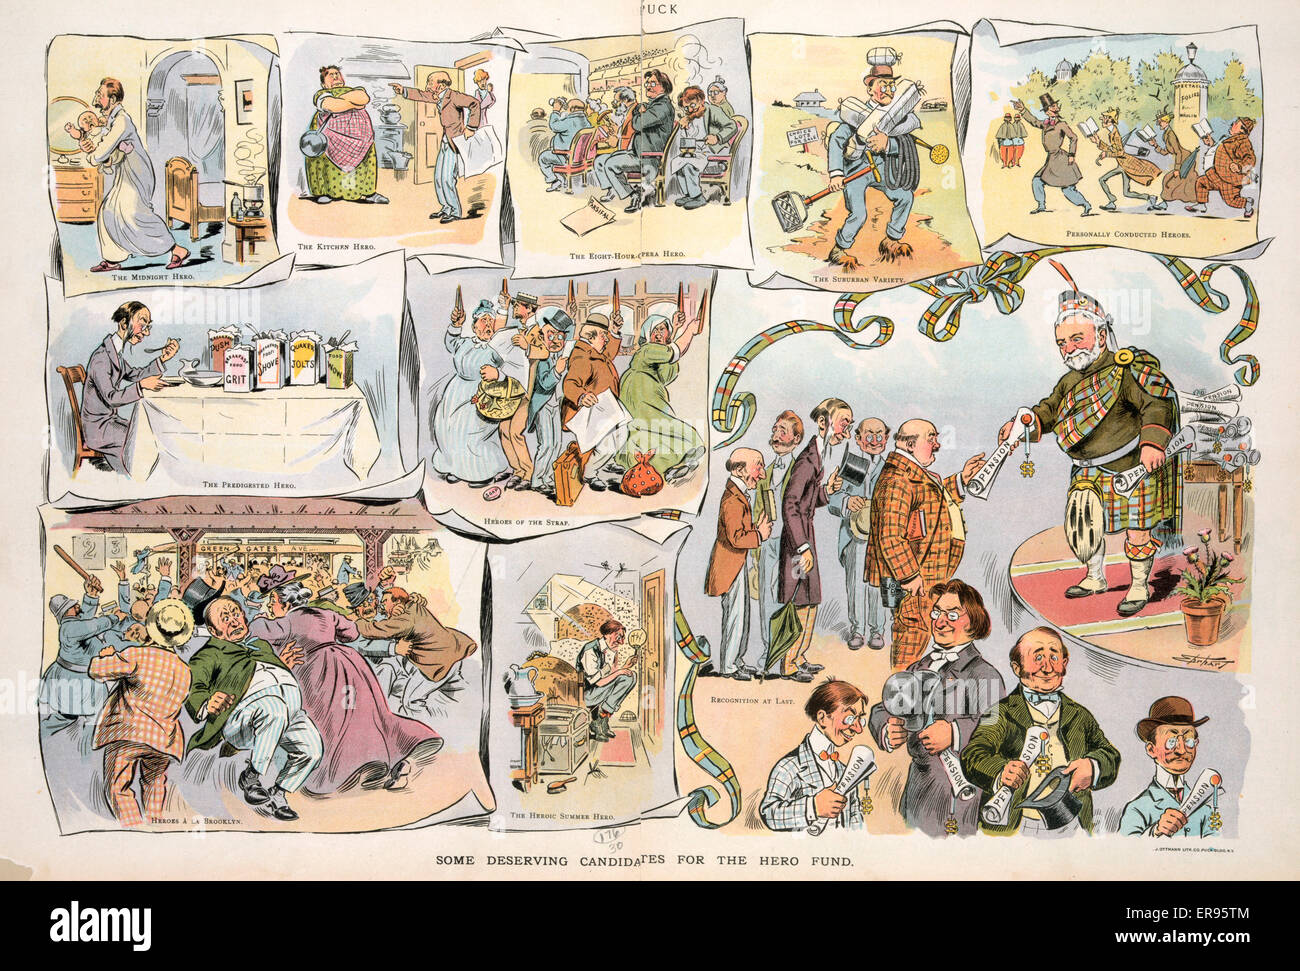 Some deserving candidates for the hero fund. Illustration shows a series of nine vignettes to the left and across the top of a main illustration. In each vignette a man puts himself at risk in one way or another; one man gets up in the middle of the night Stock Photo